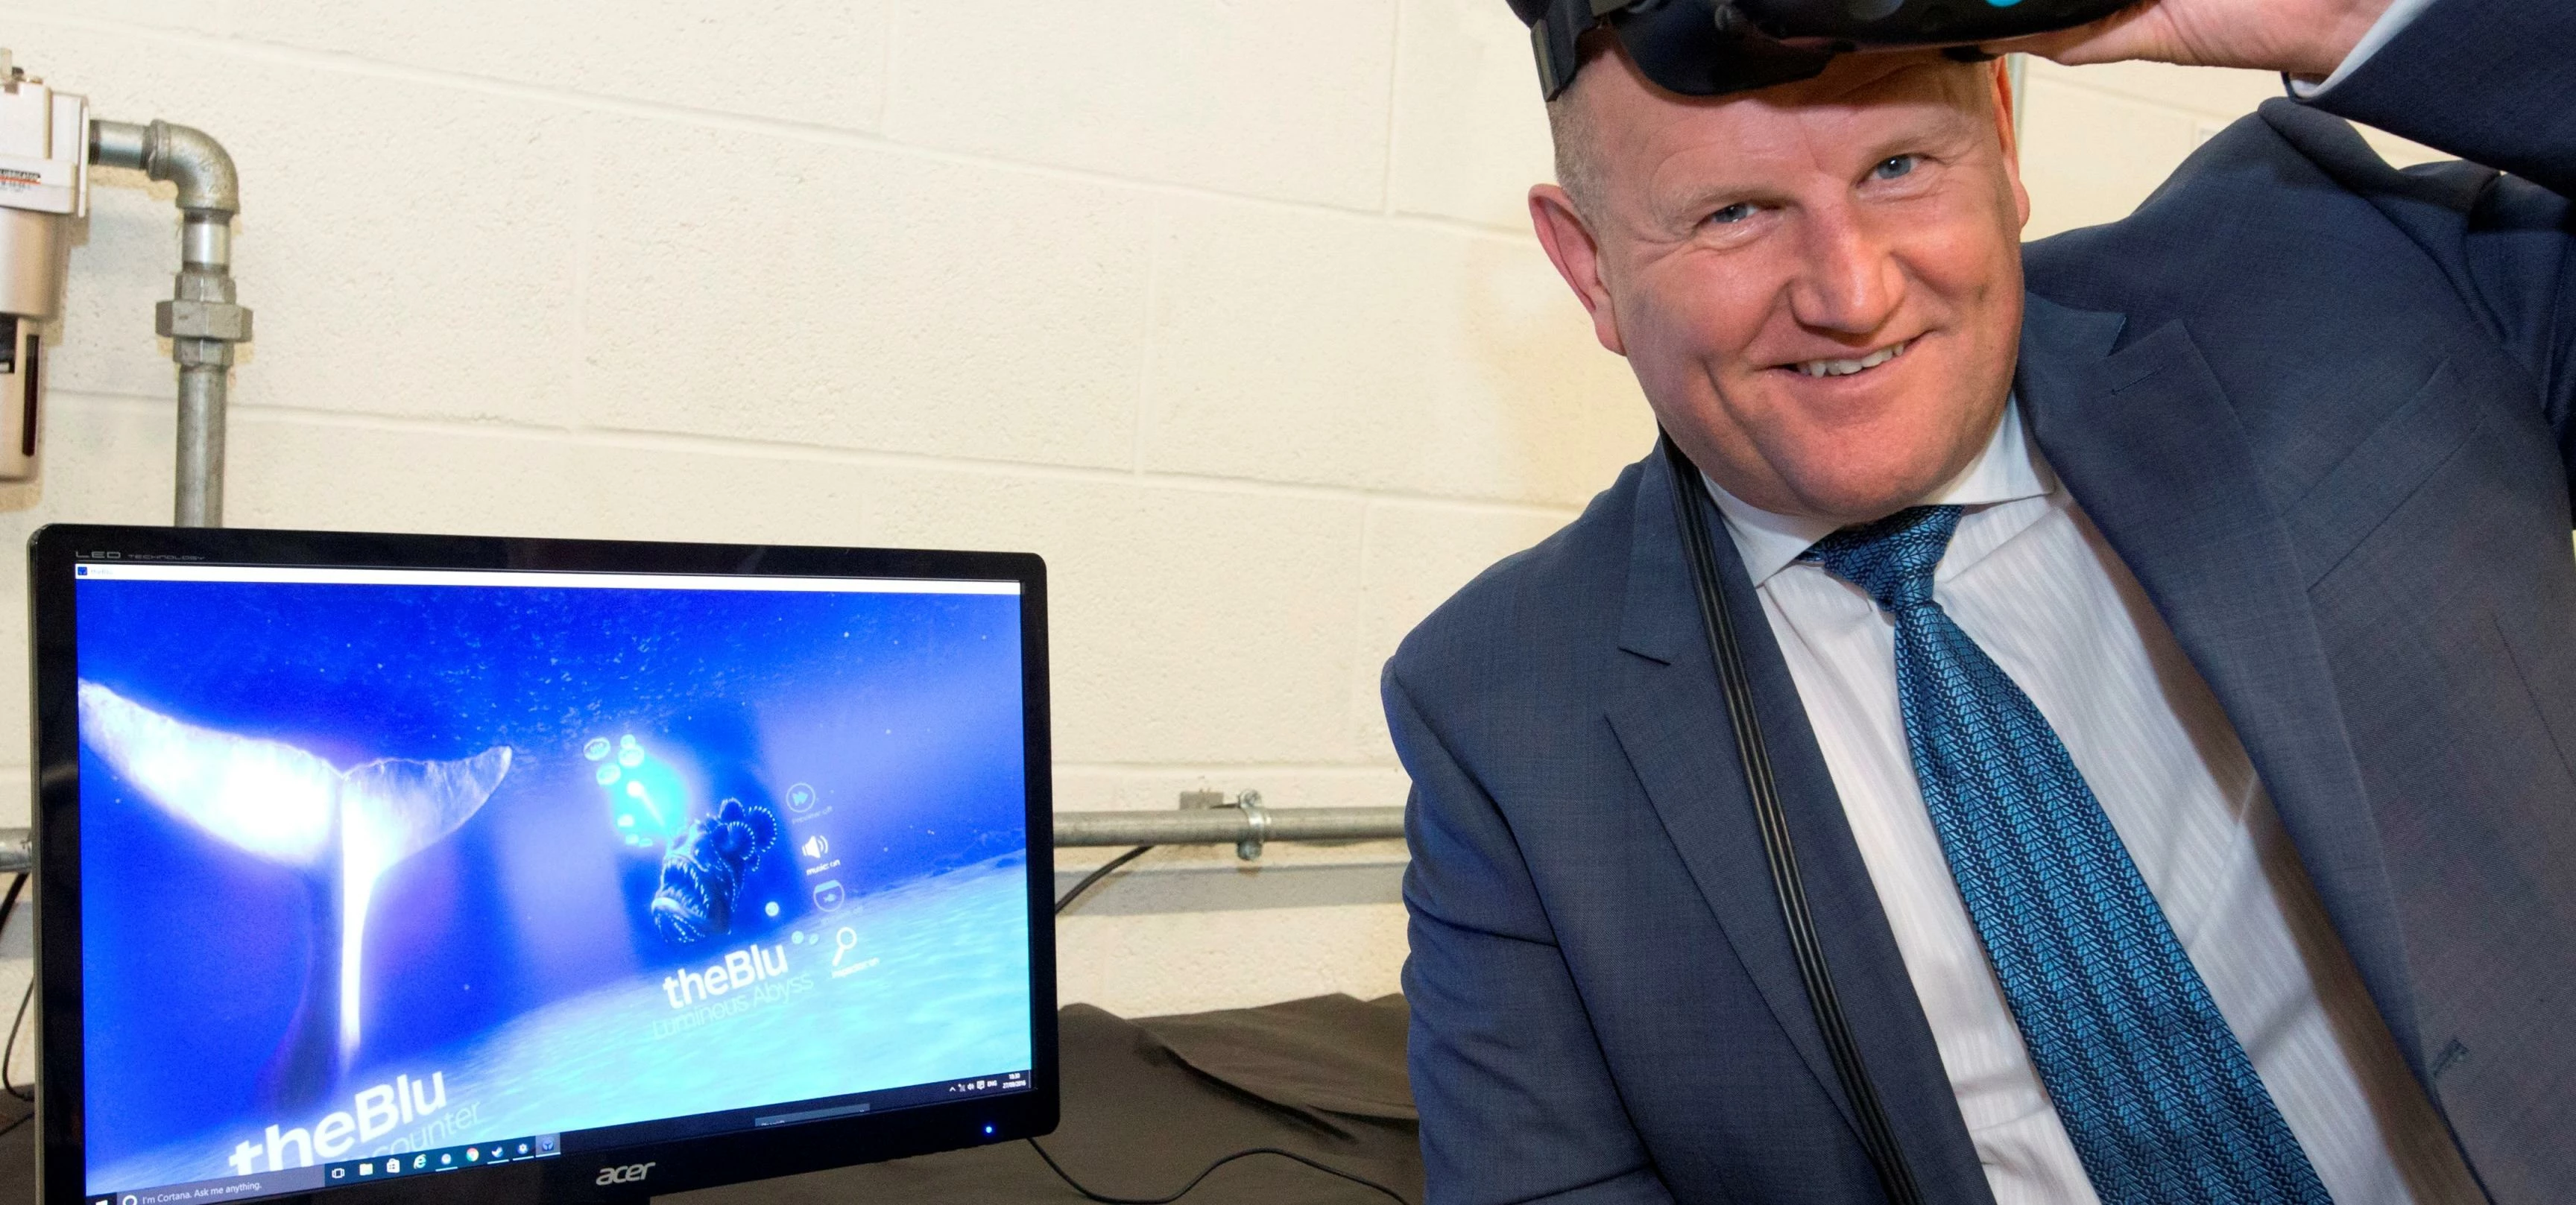 Durham Chief Constable with VR equipment